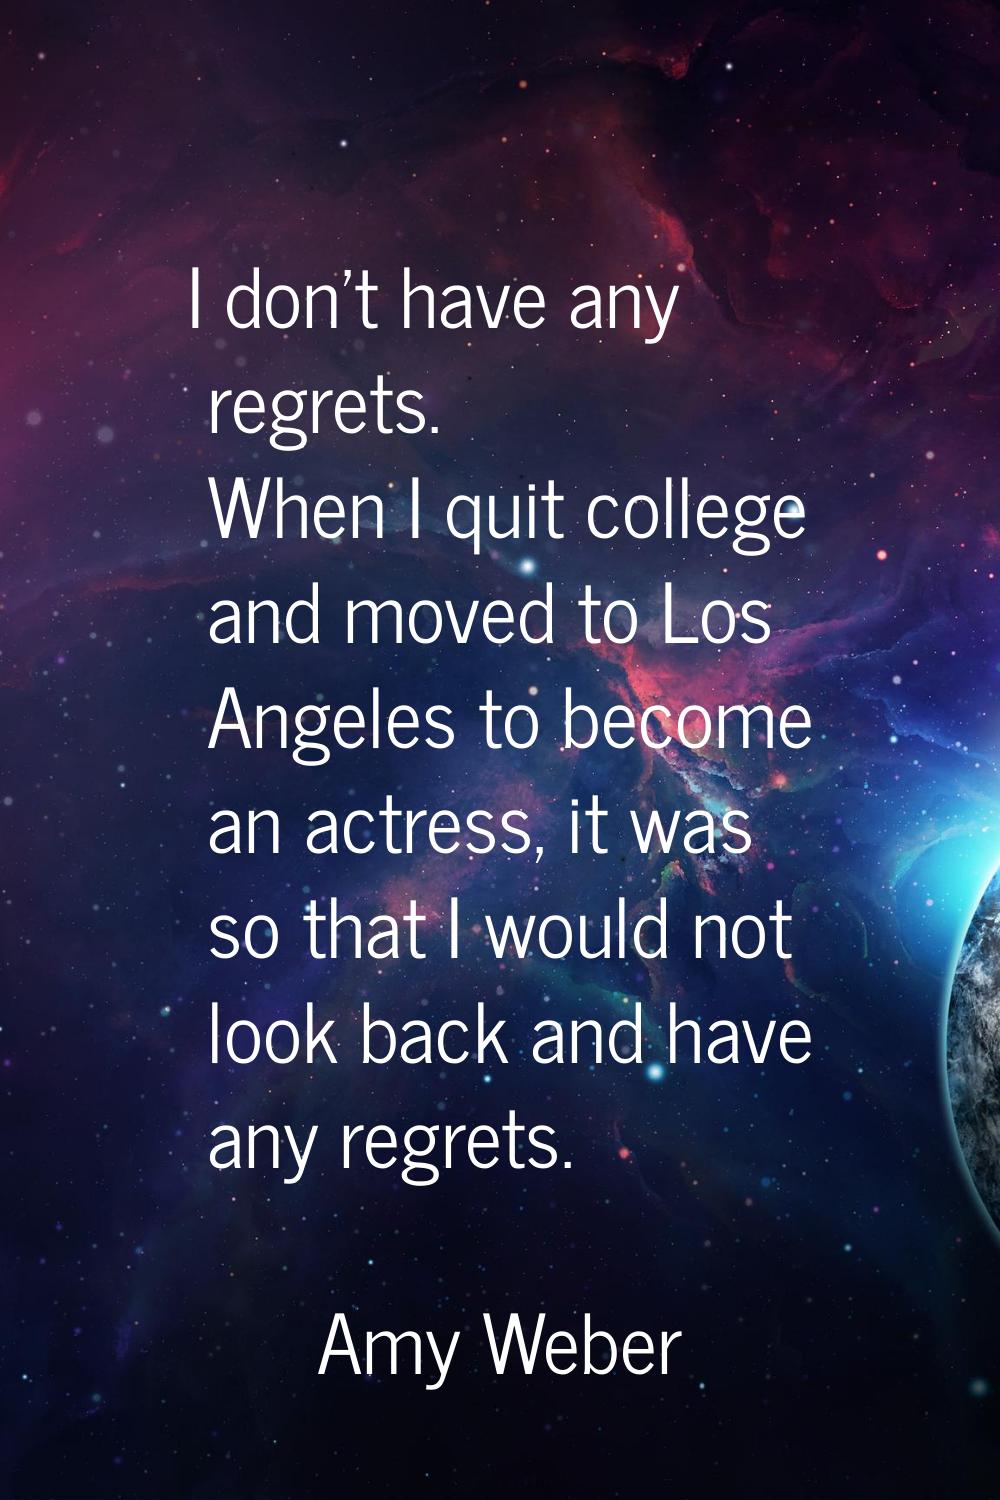 I don't have any regrets. When I quit college and moved to Los Angeles to become an actress, it was